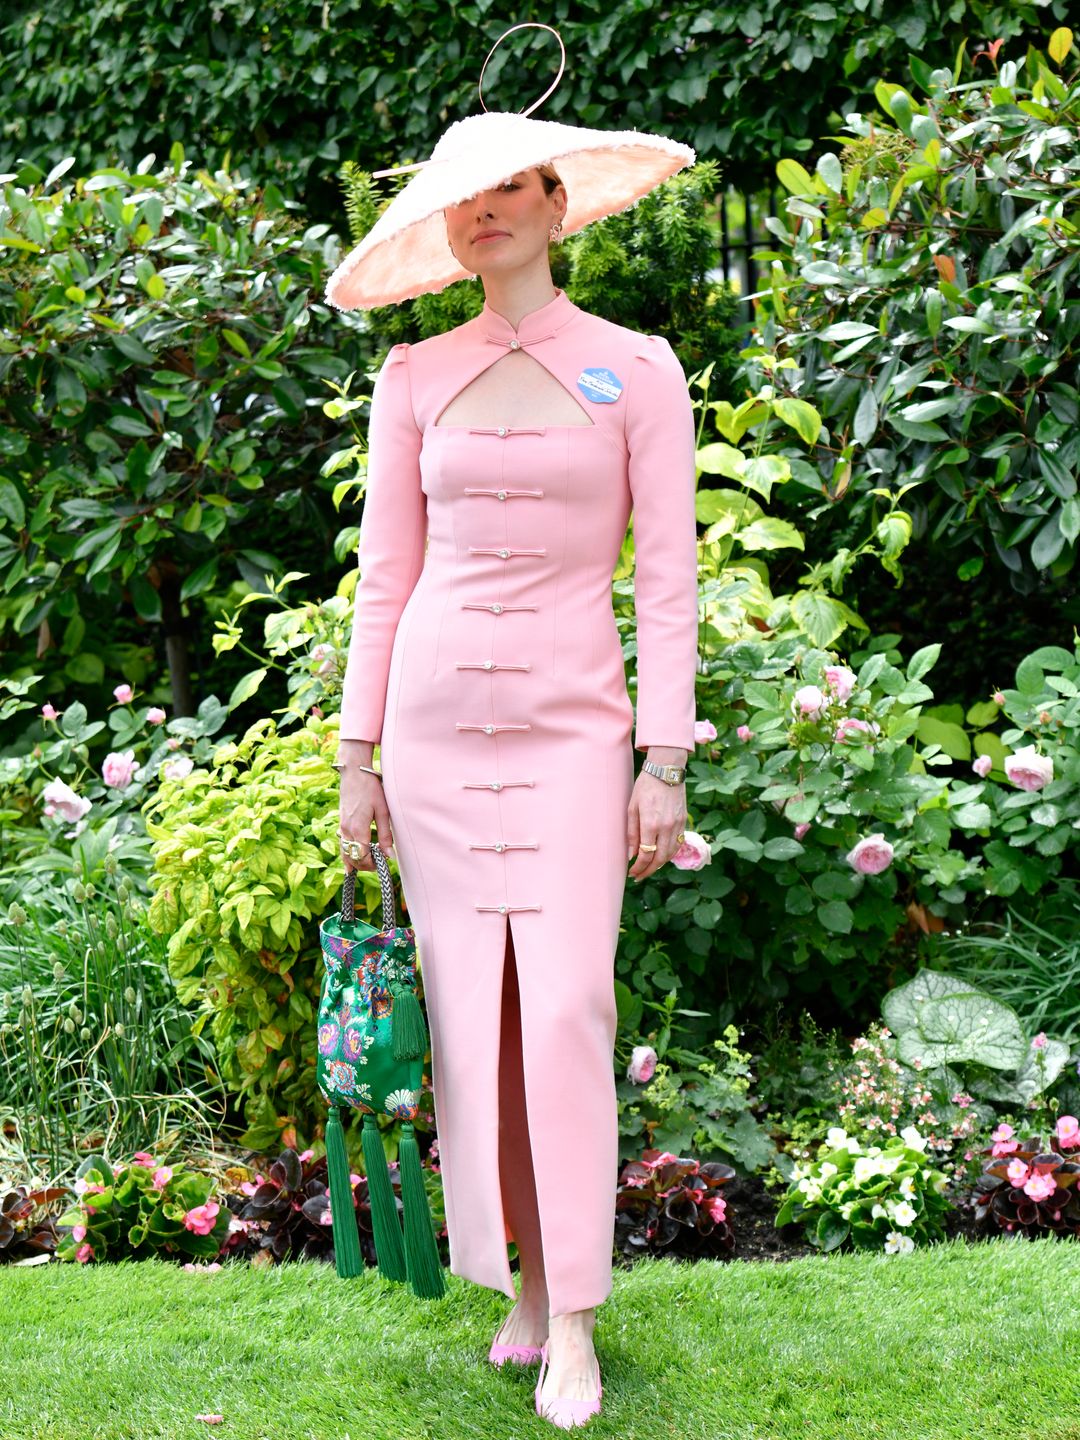 Fashion Editor Flora MacDonald Johnston donned a Huishan Zhang dress which she teamed with a hat from Lock & Co. and jewellery from Liv Luttrell.